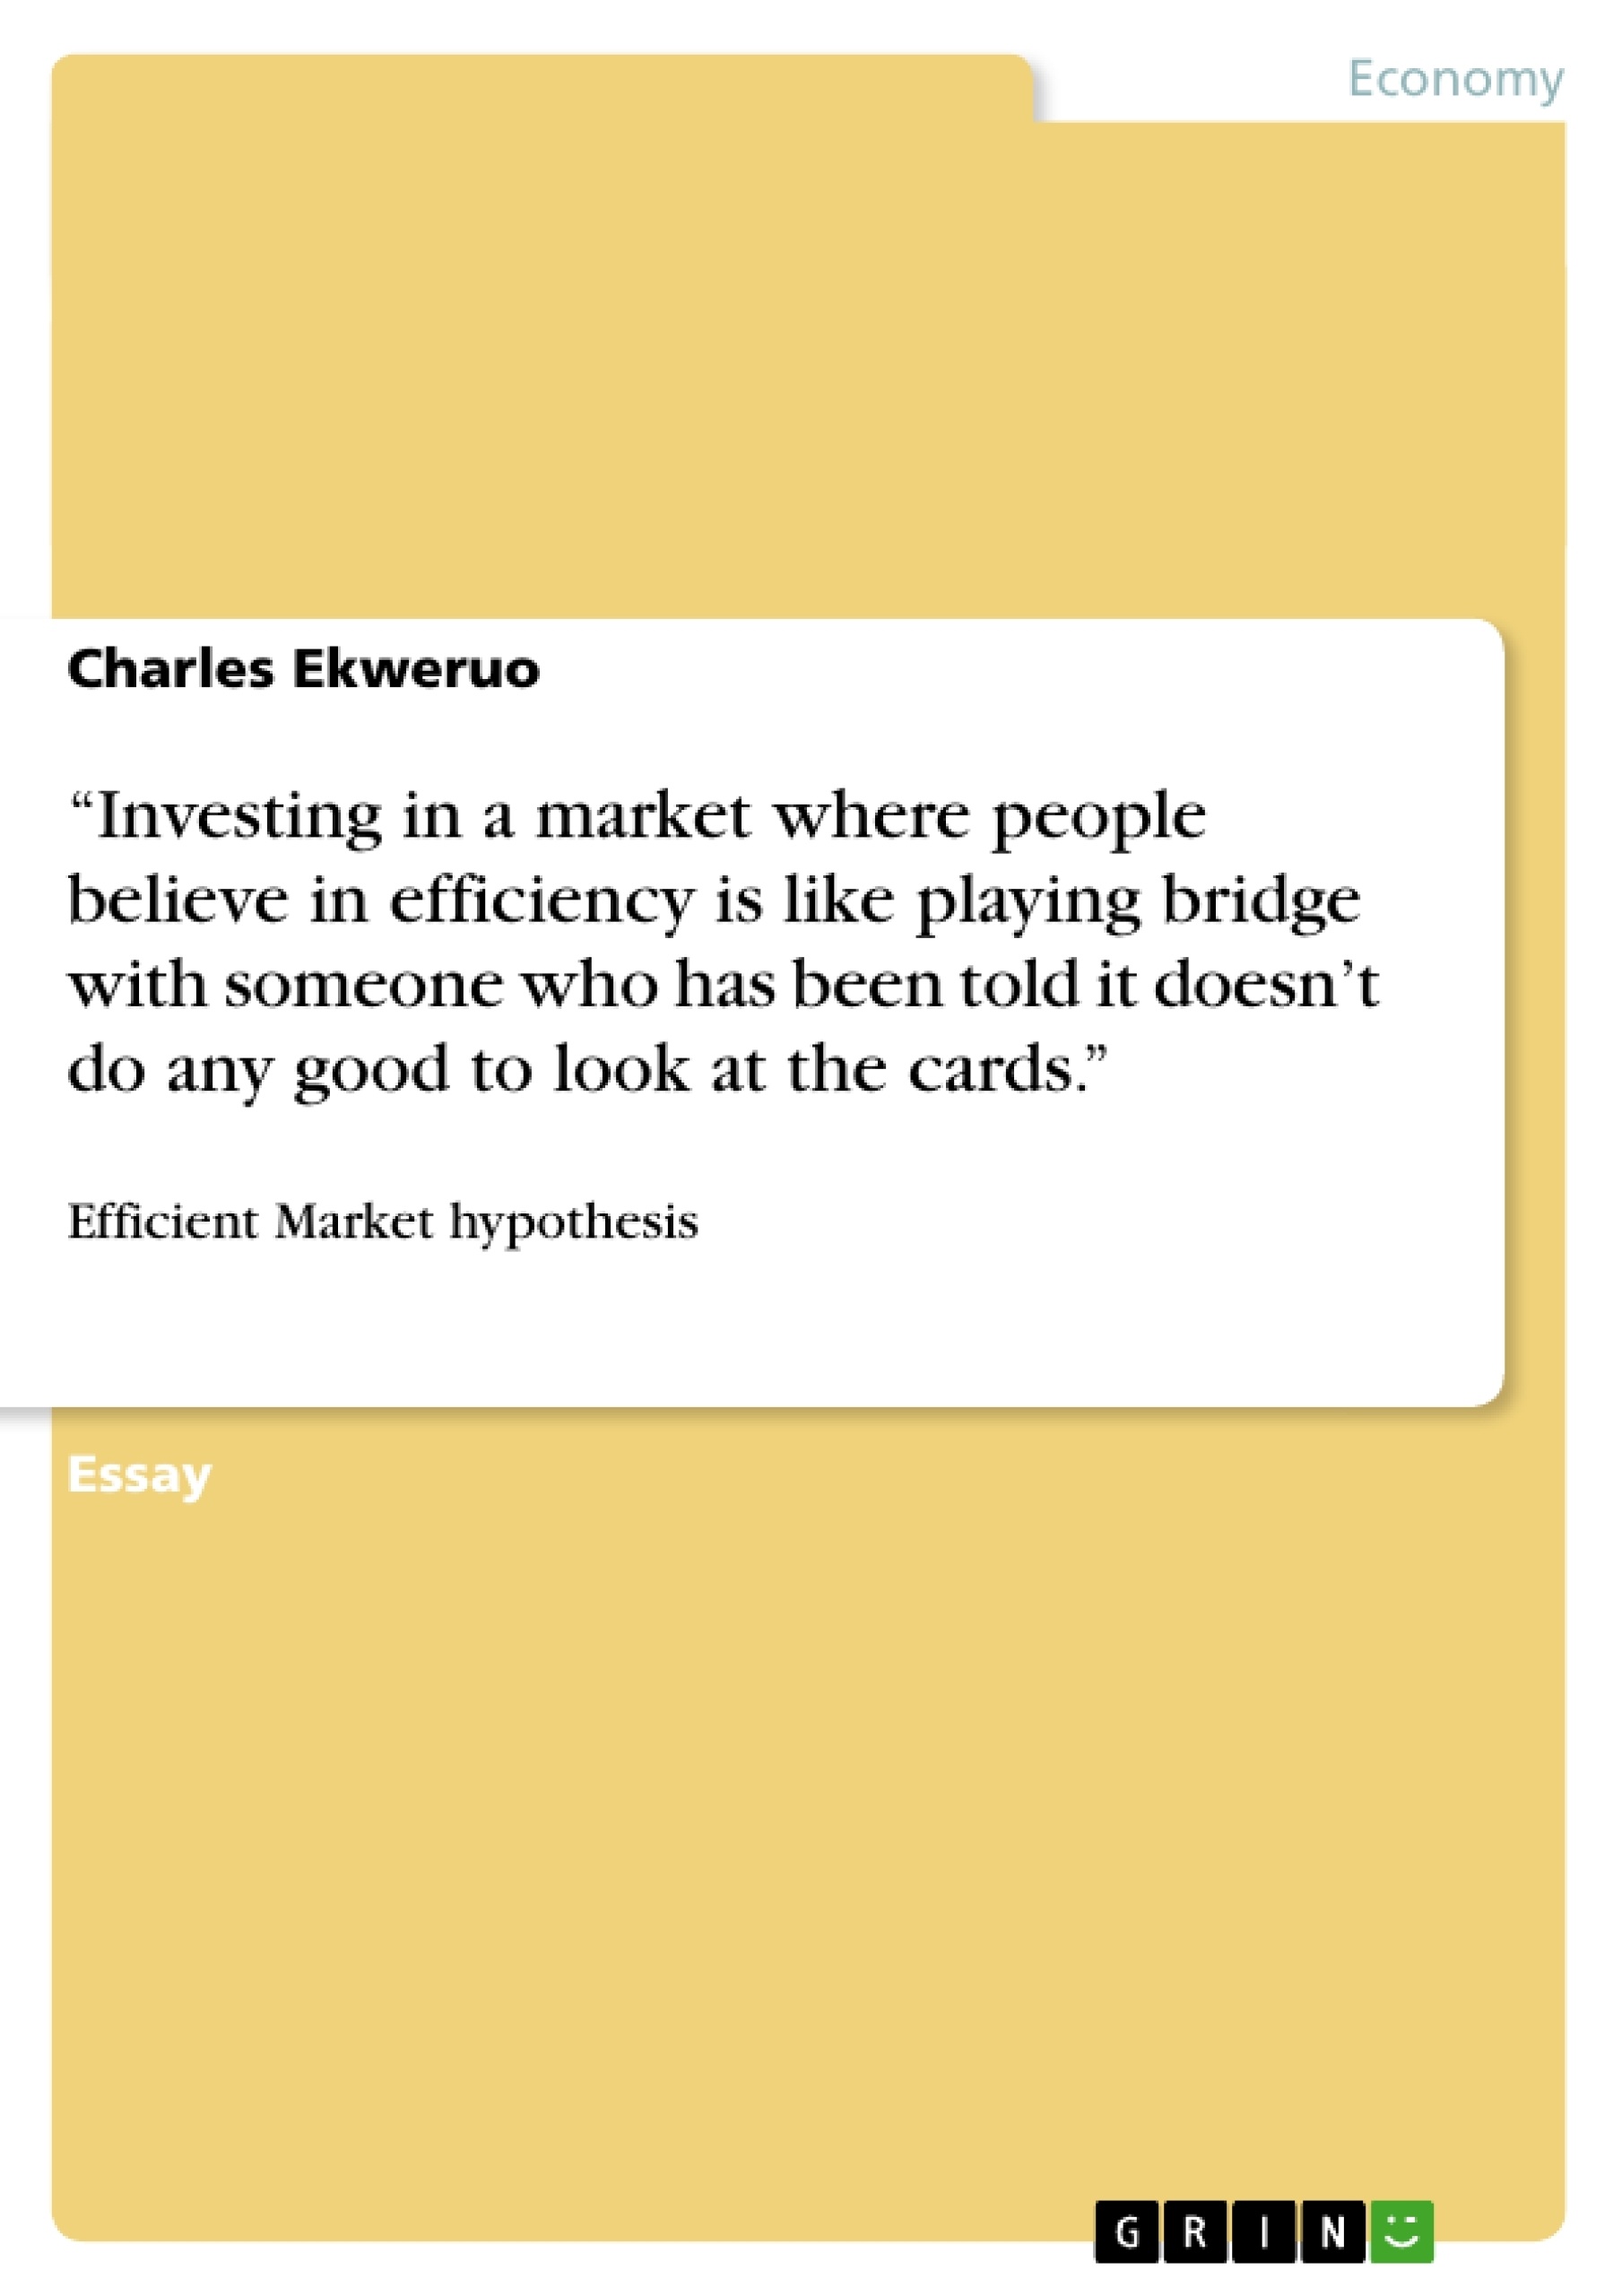 Titre: “Investing in a market where people believe in efficiency is like playing bridge with someone who has been told it doesn’t do any good to look at the cards.”